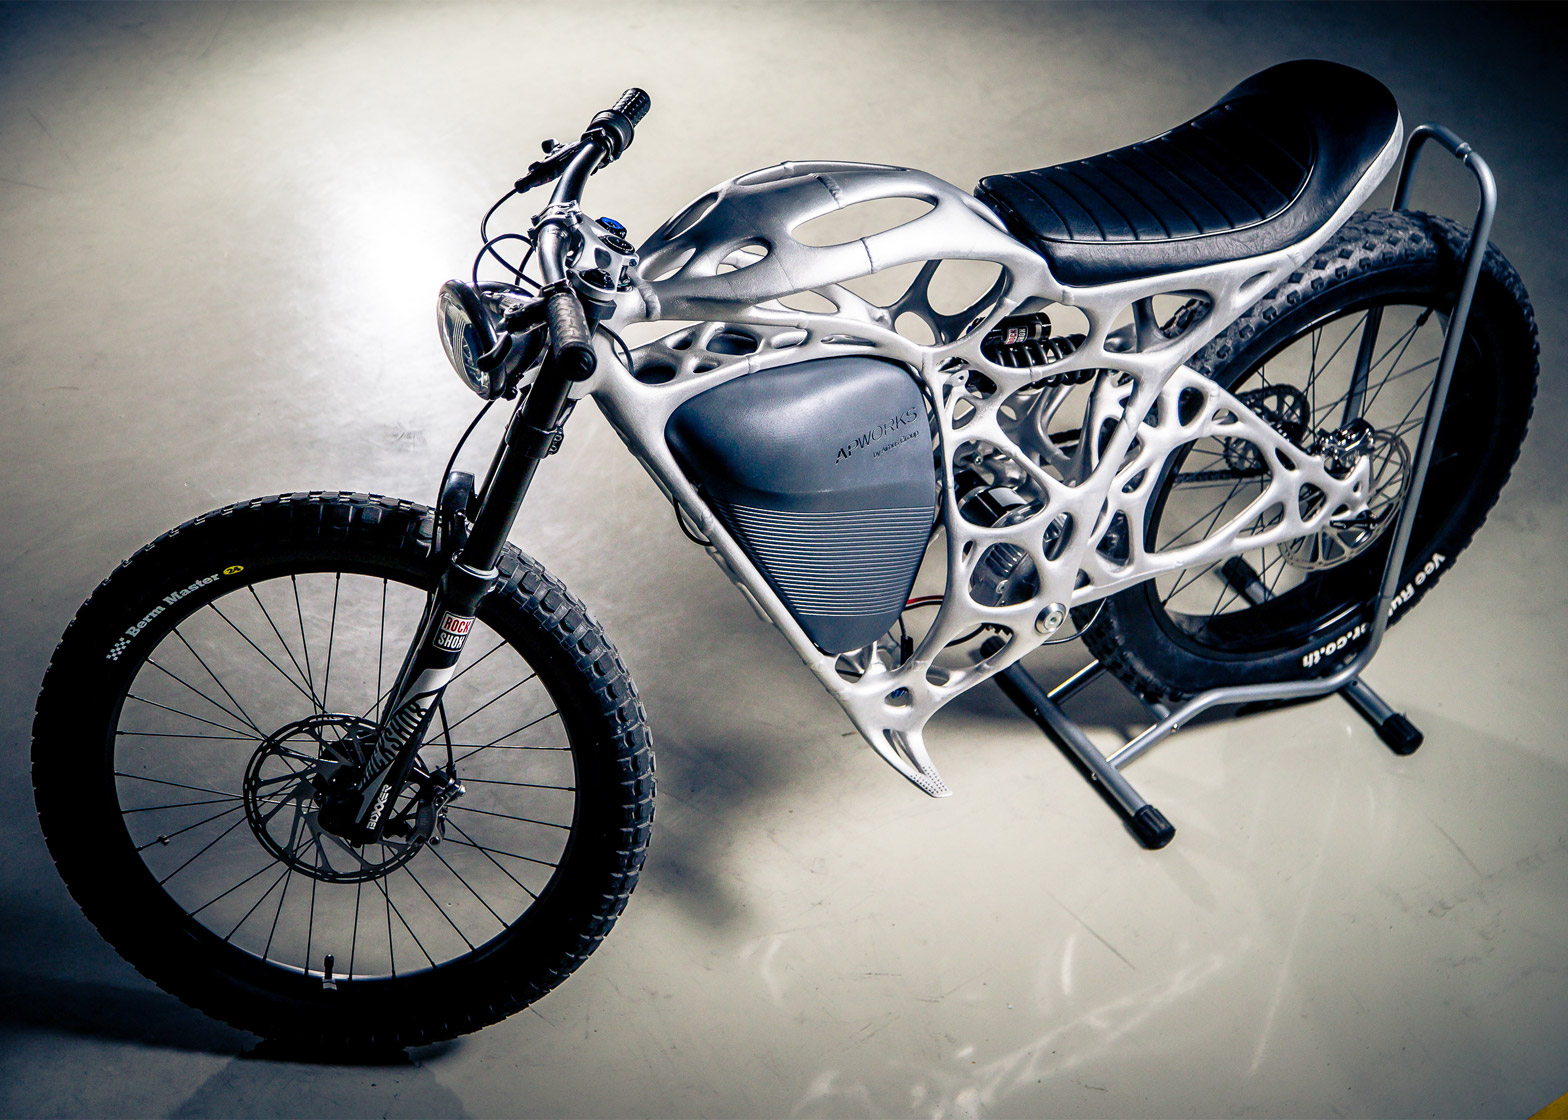 Six amazing all-electric motorcycles